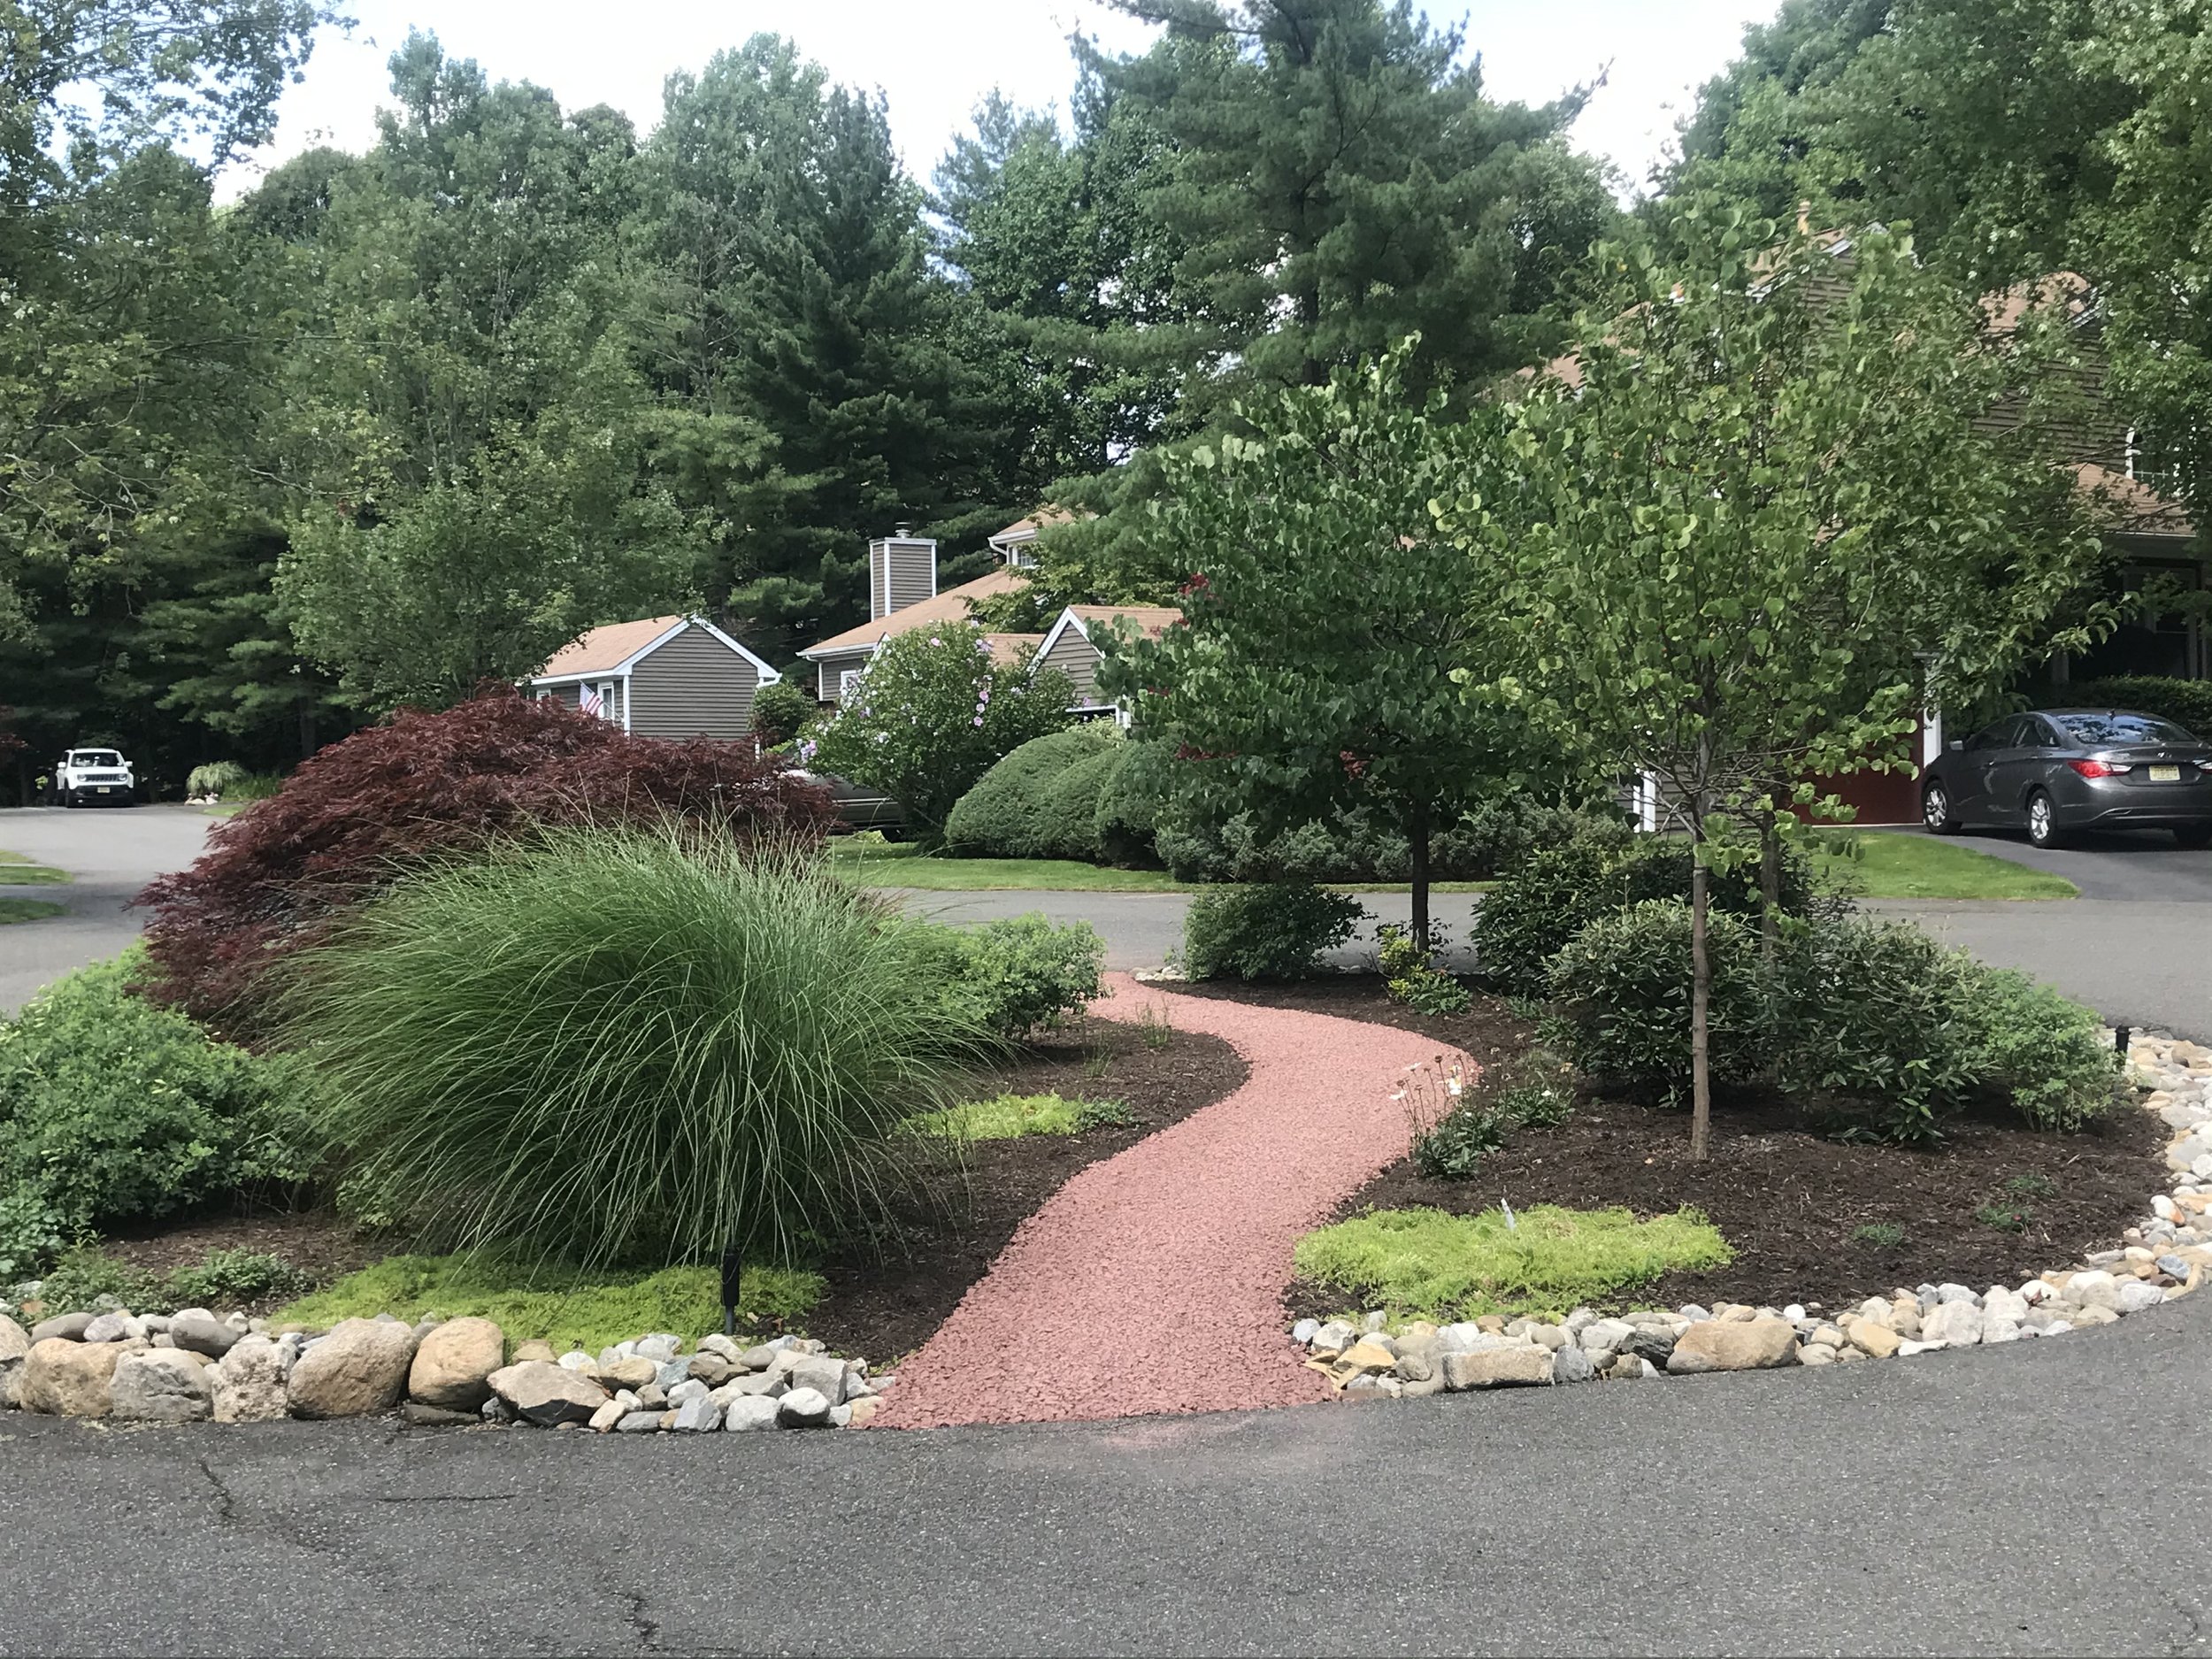 Commercial Landscape Construction Companies in Northern New Jersey